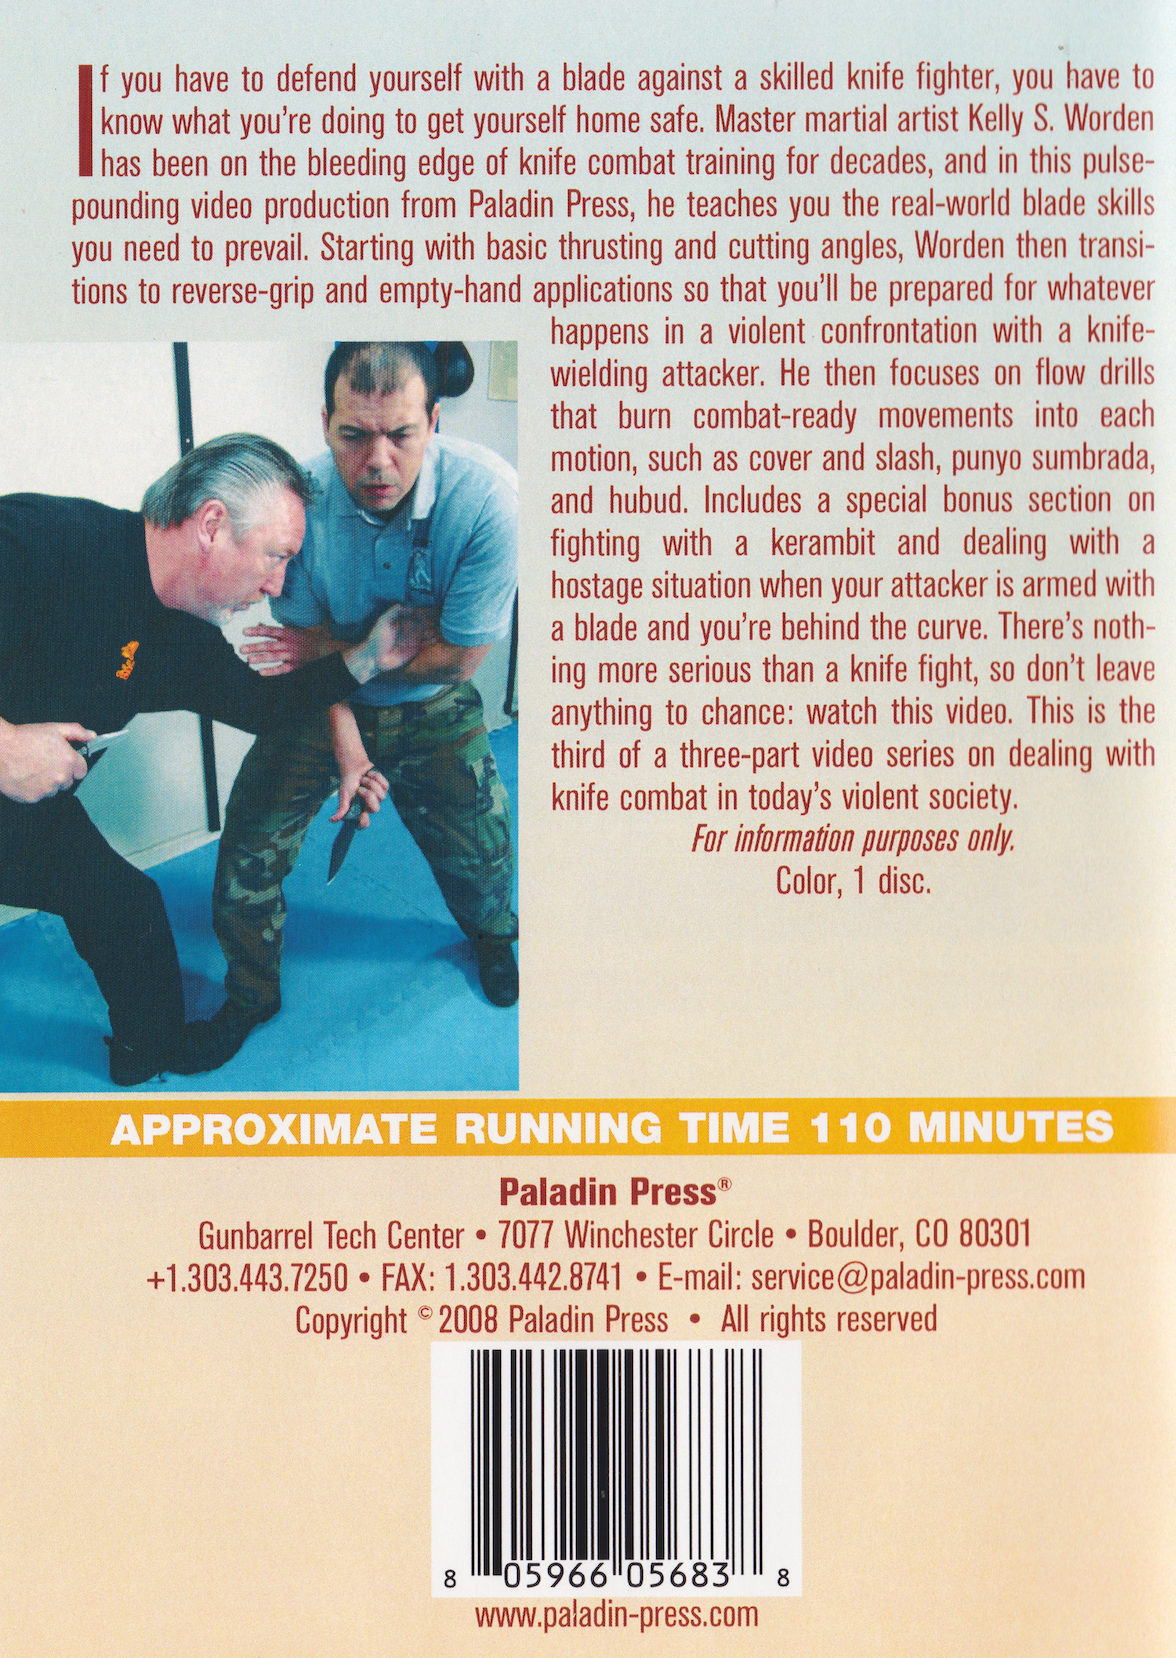 21st Century Knife Combat DVD 3  by Kelly Worden (Preowned)